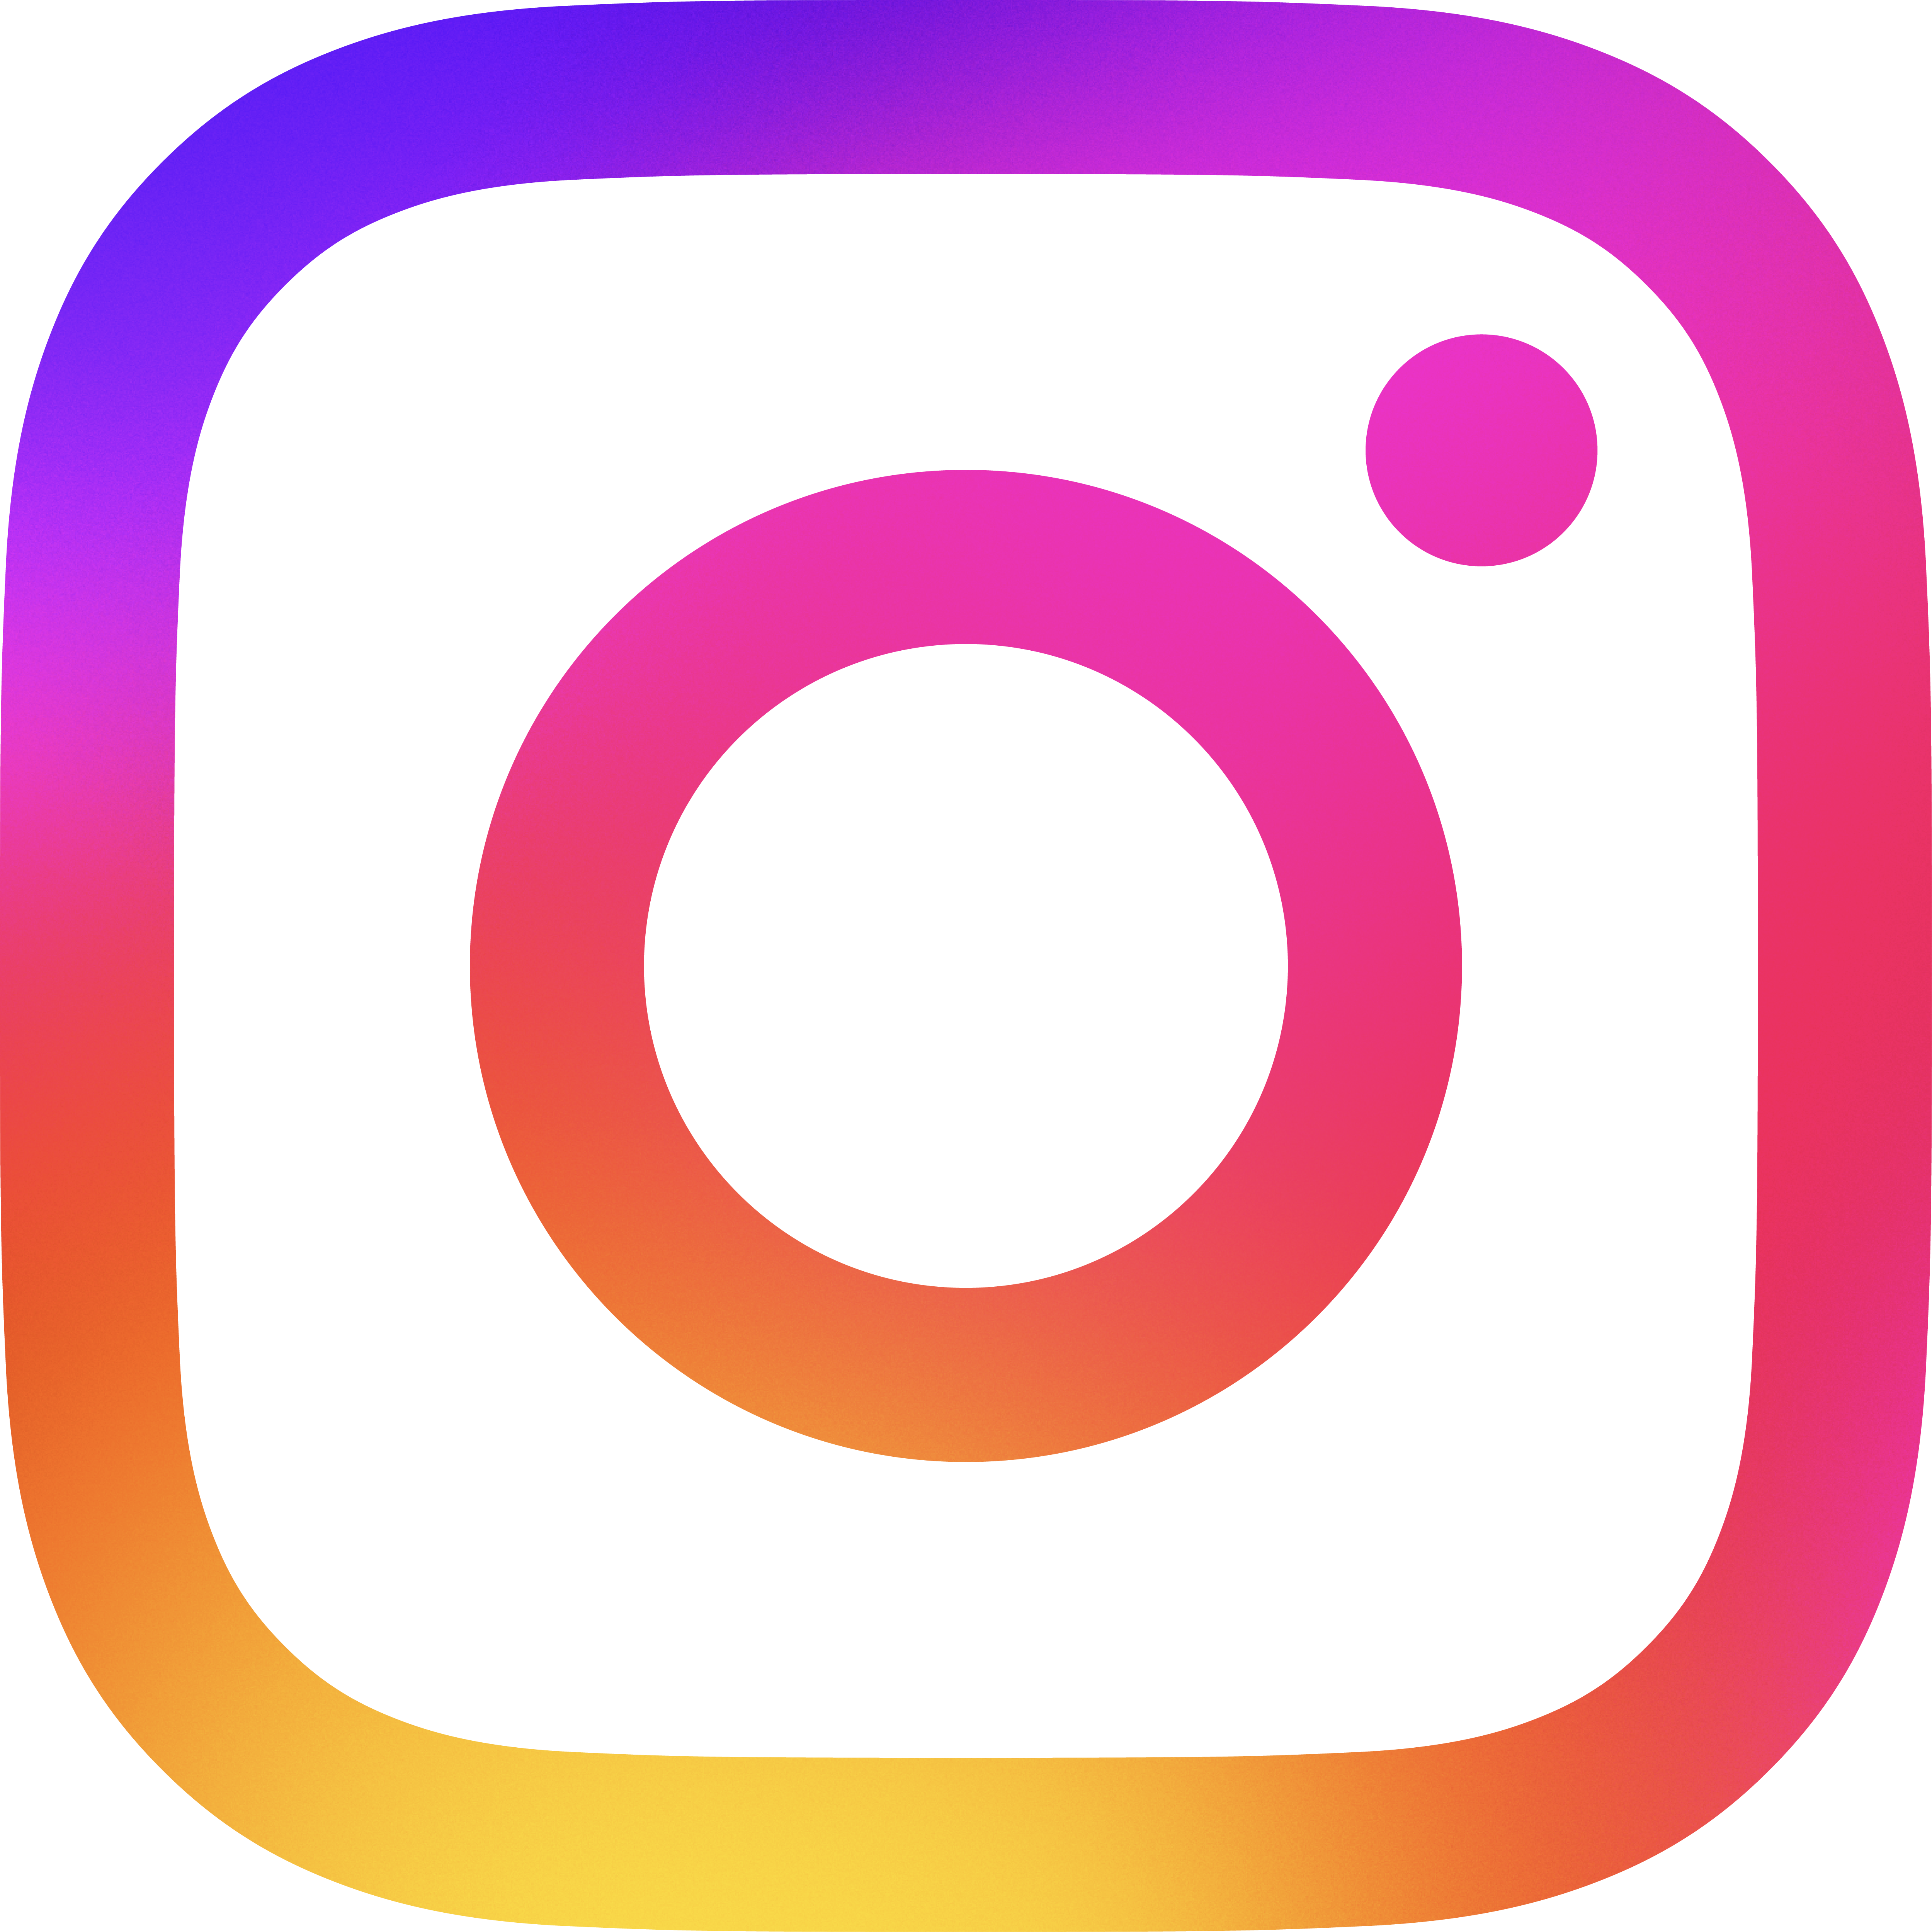 The Instagram logo with a link to our Instagram page